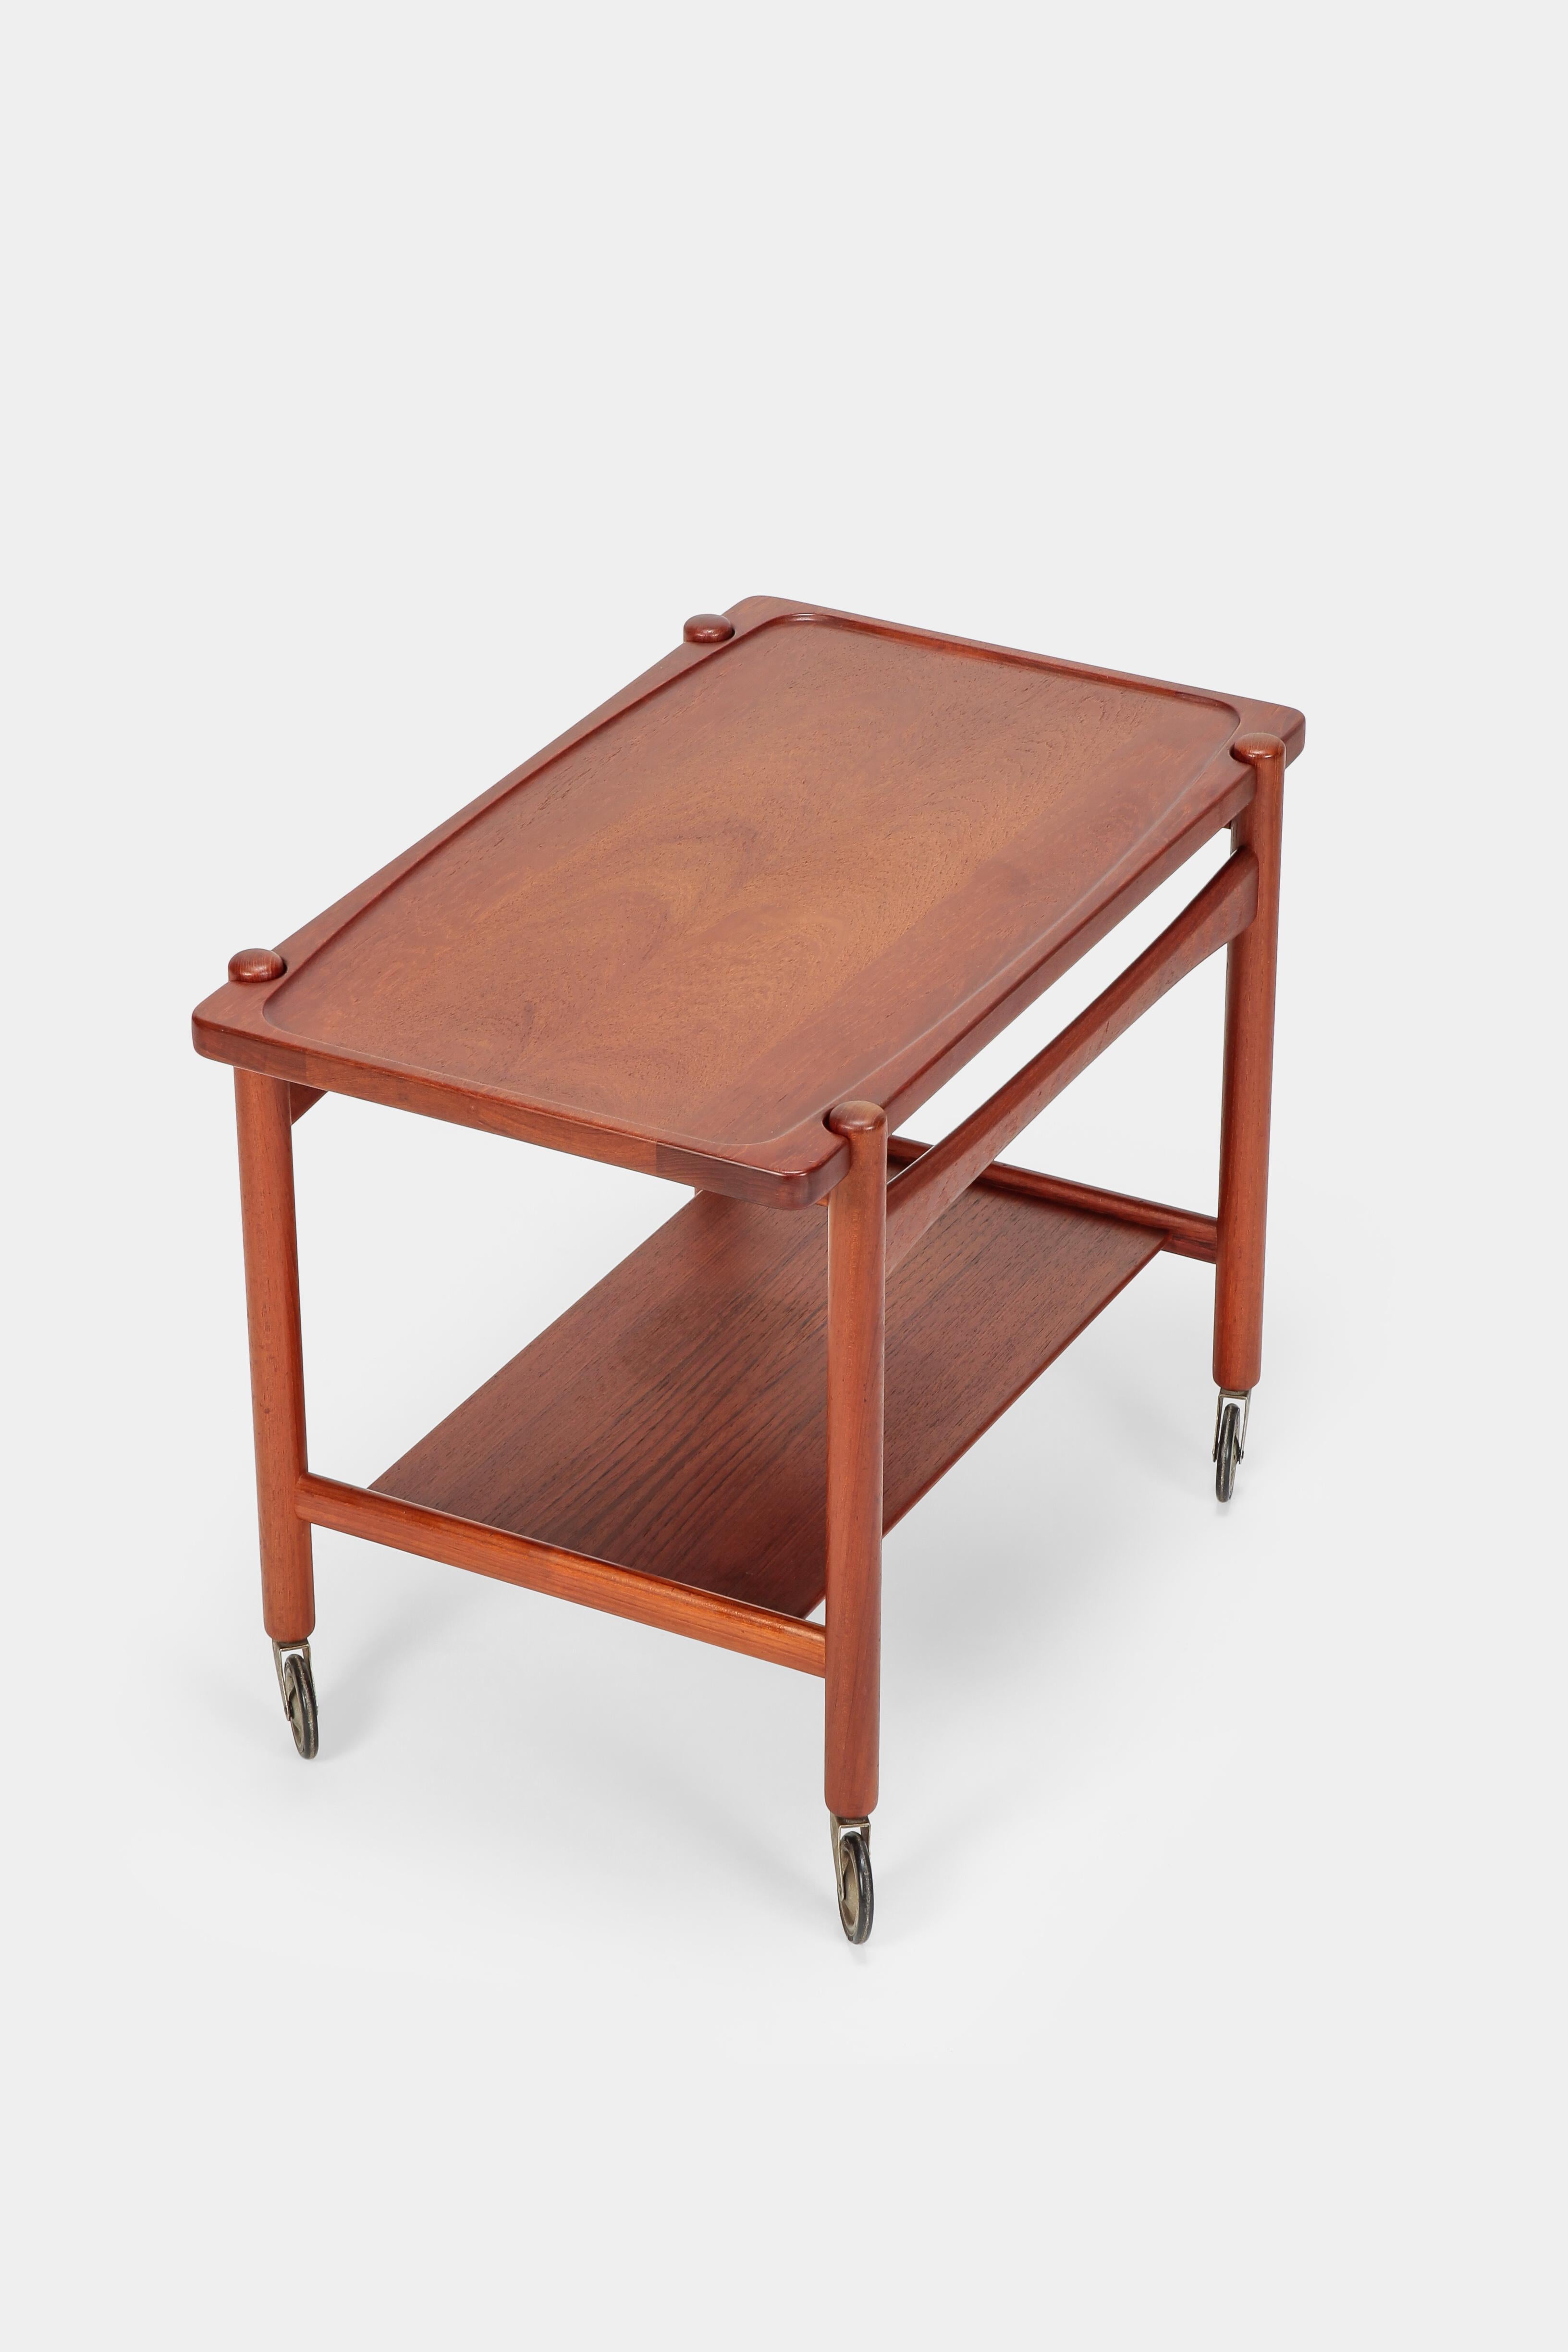 Hans Wegner serving trolley made of solid teak from the sixties, manufactured by Andreas Tuck in Denmark. The tabletop can be taken off and used as a separate serving tray. Vivid color, strong lines softened by curved elements. Adorable object and